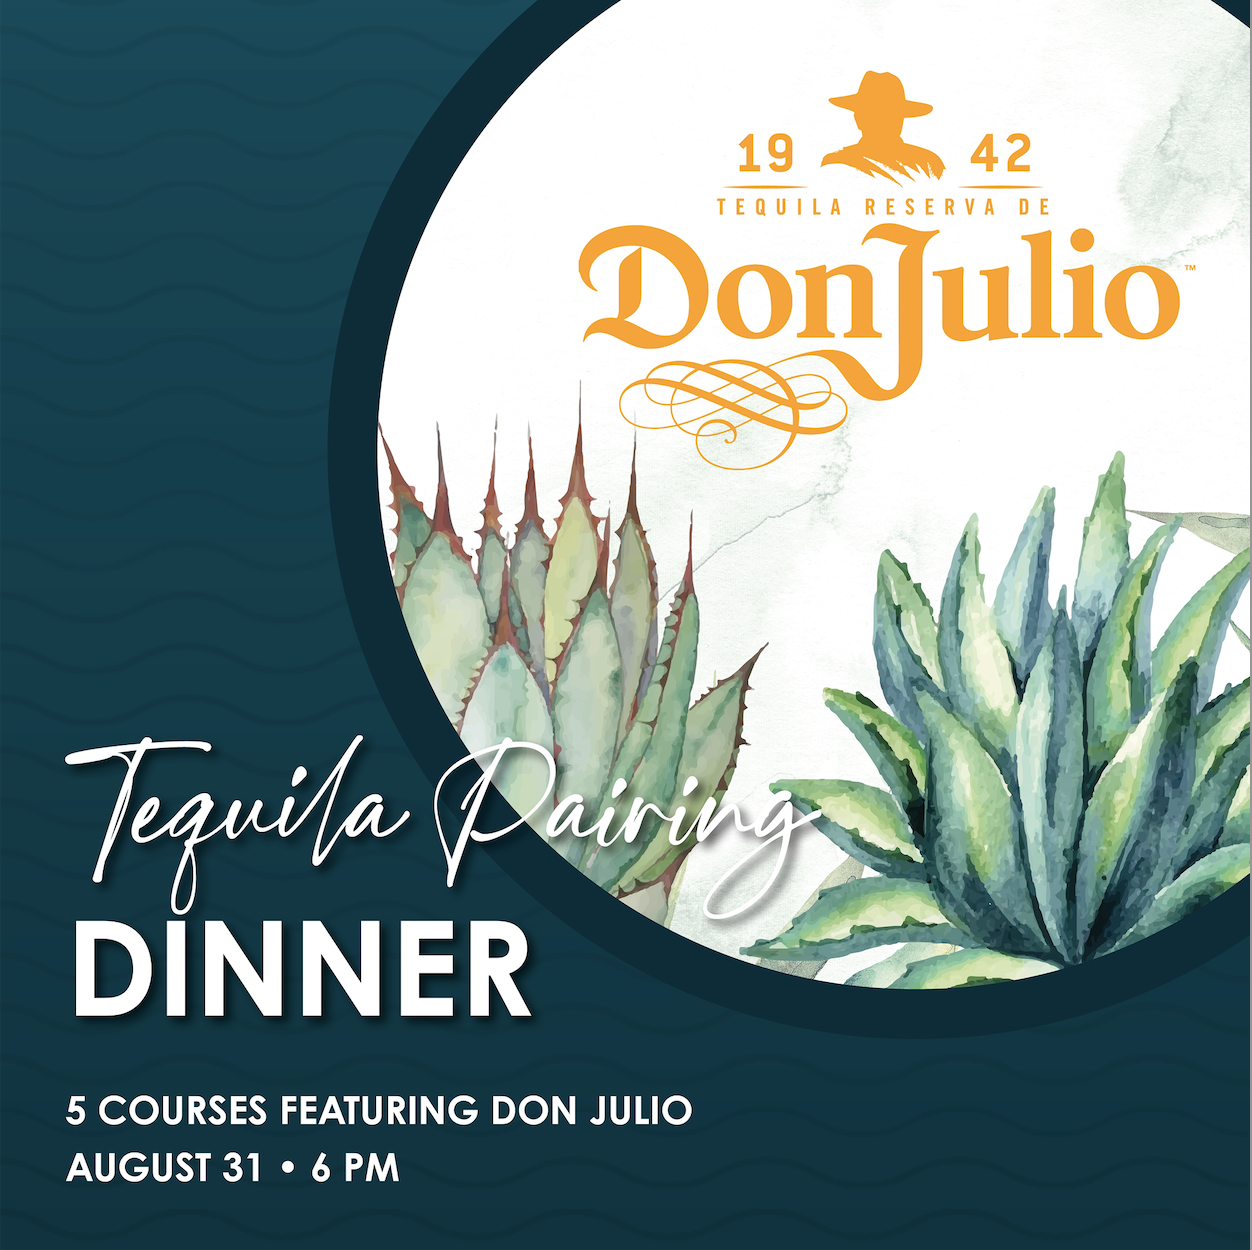 DonJulio_Aug 31_Tequila Dinner_web3